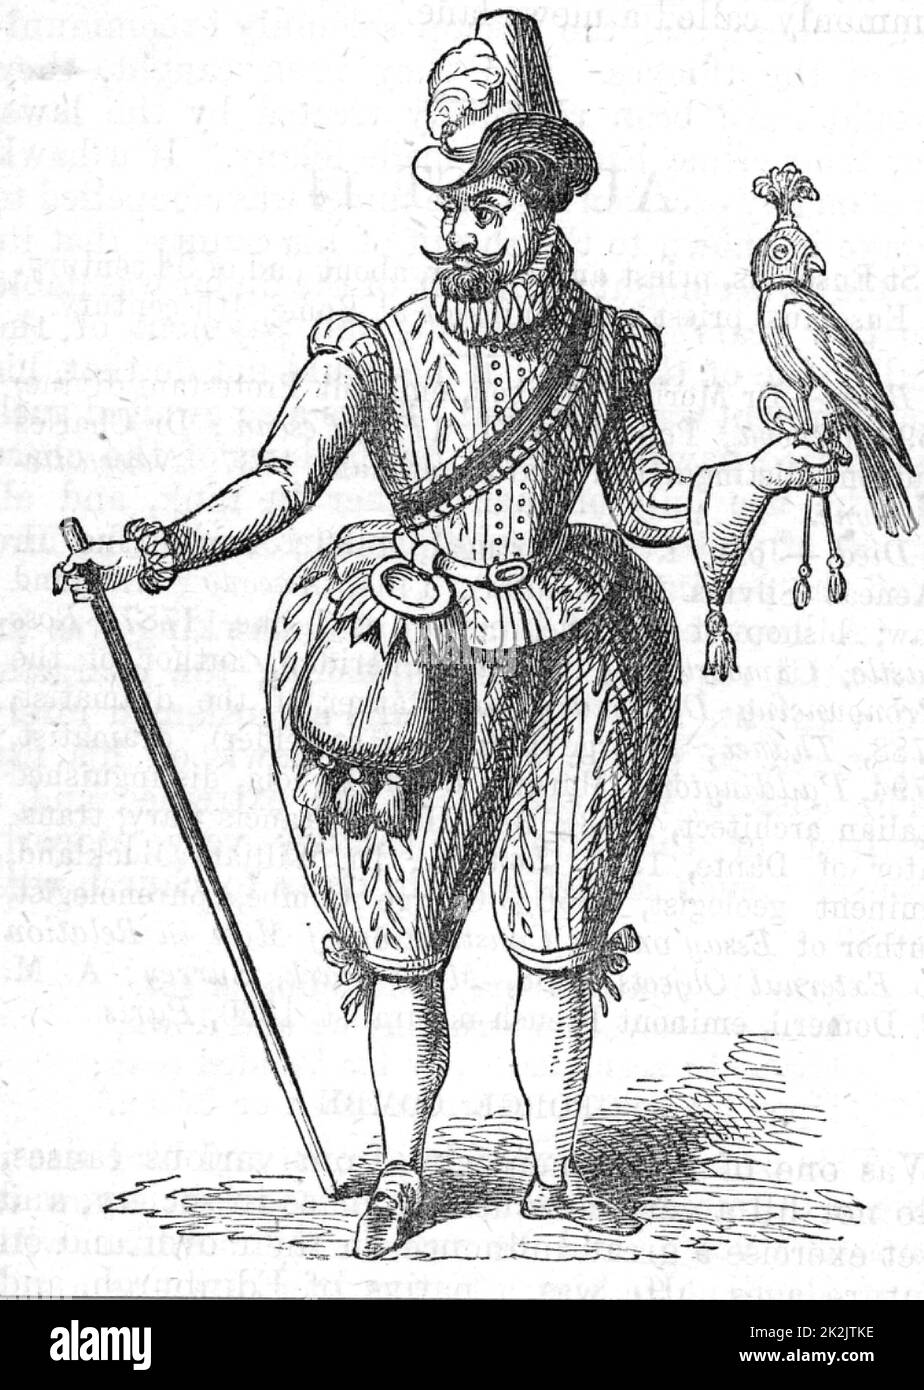 James I of England, VI of Scotland (1566-1625), in hawking costume. 19th century woodcut based on a contemporary image. Stock Photo